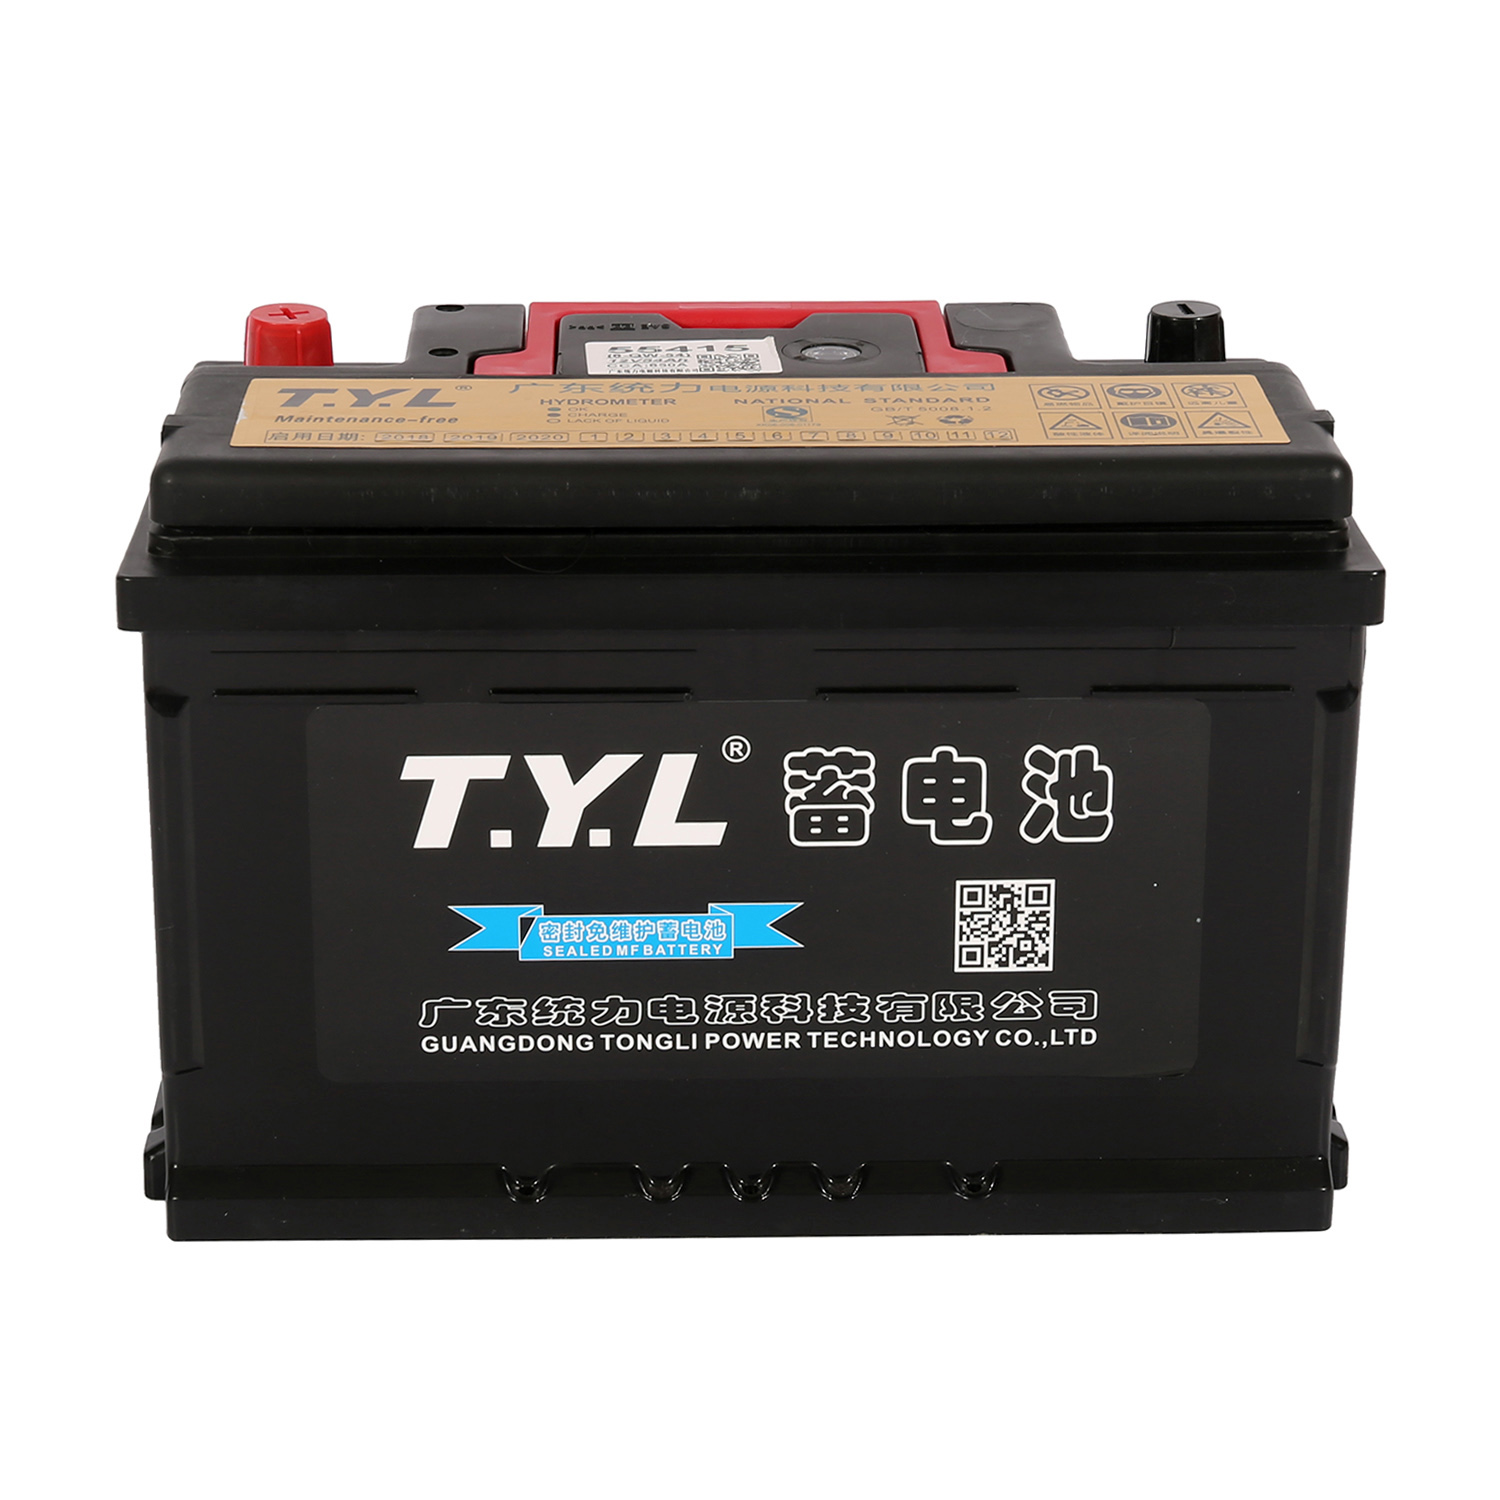 55415 12V54AH Quickly Charging Car Battery With Positive Terminal For Vehicles' Radios